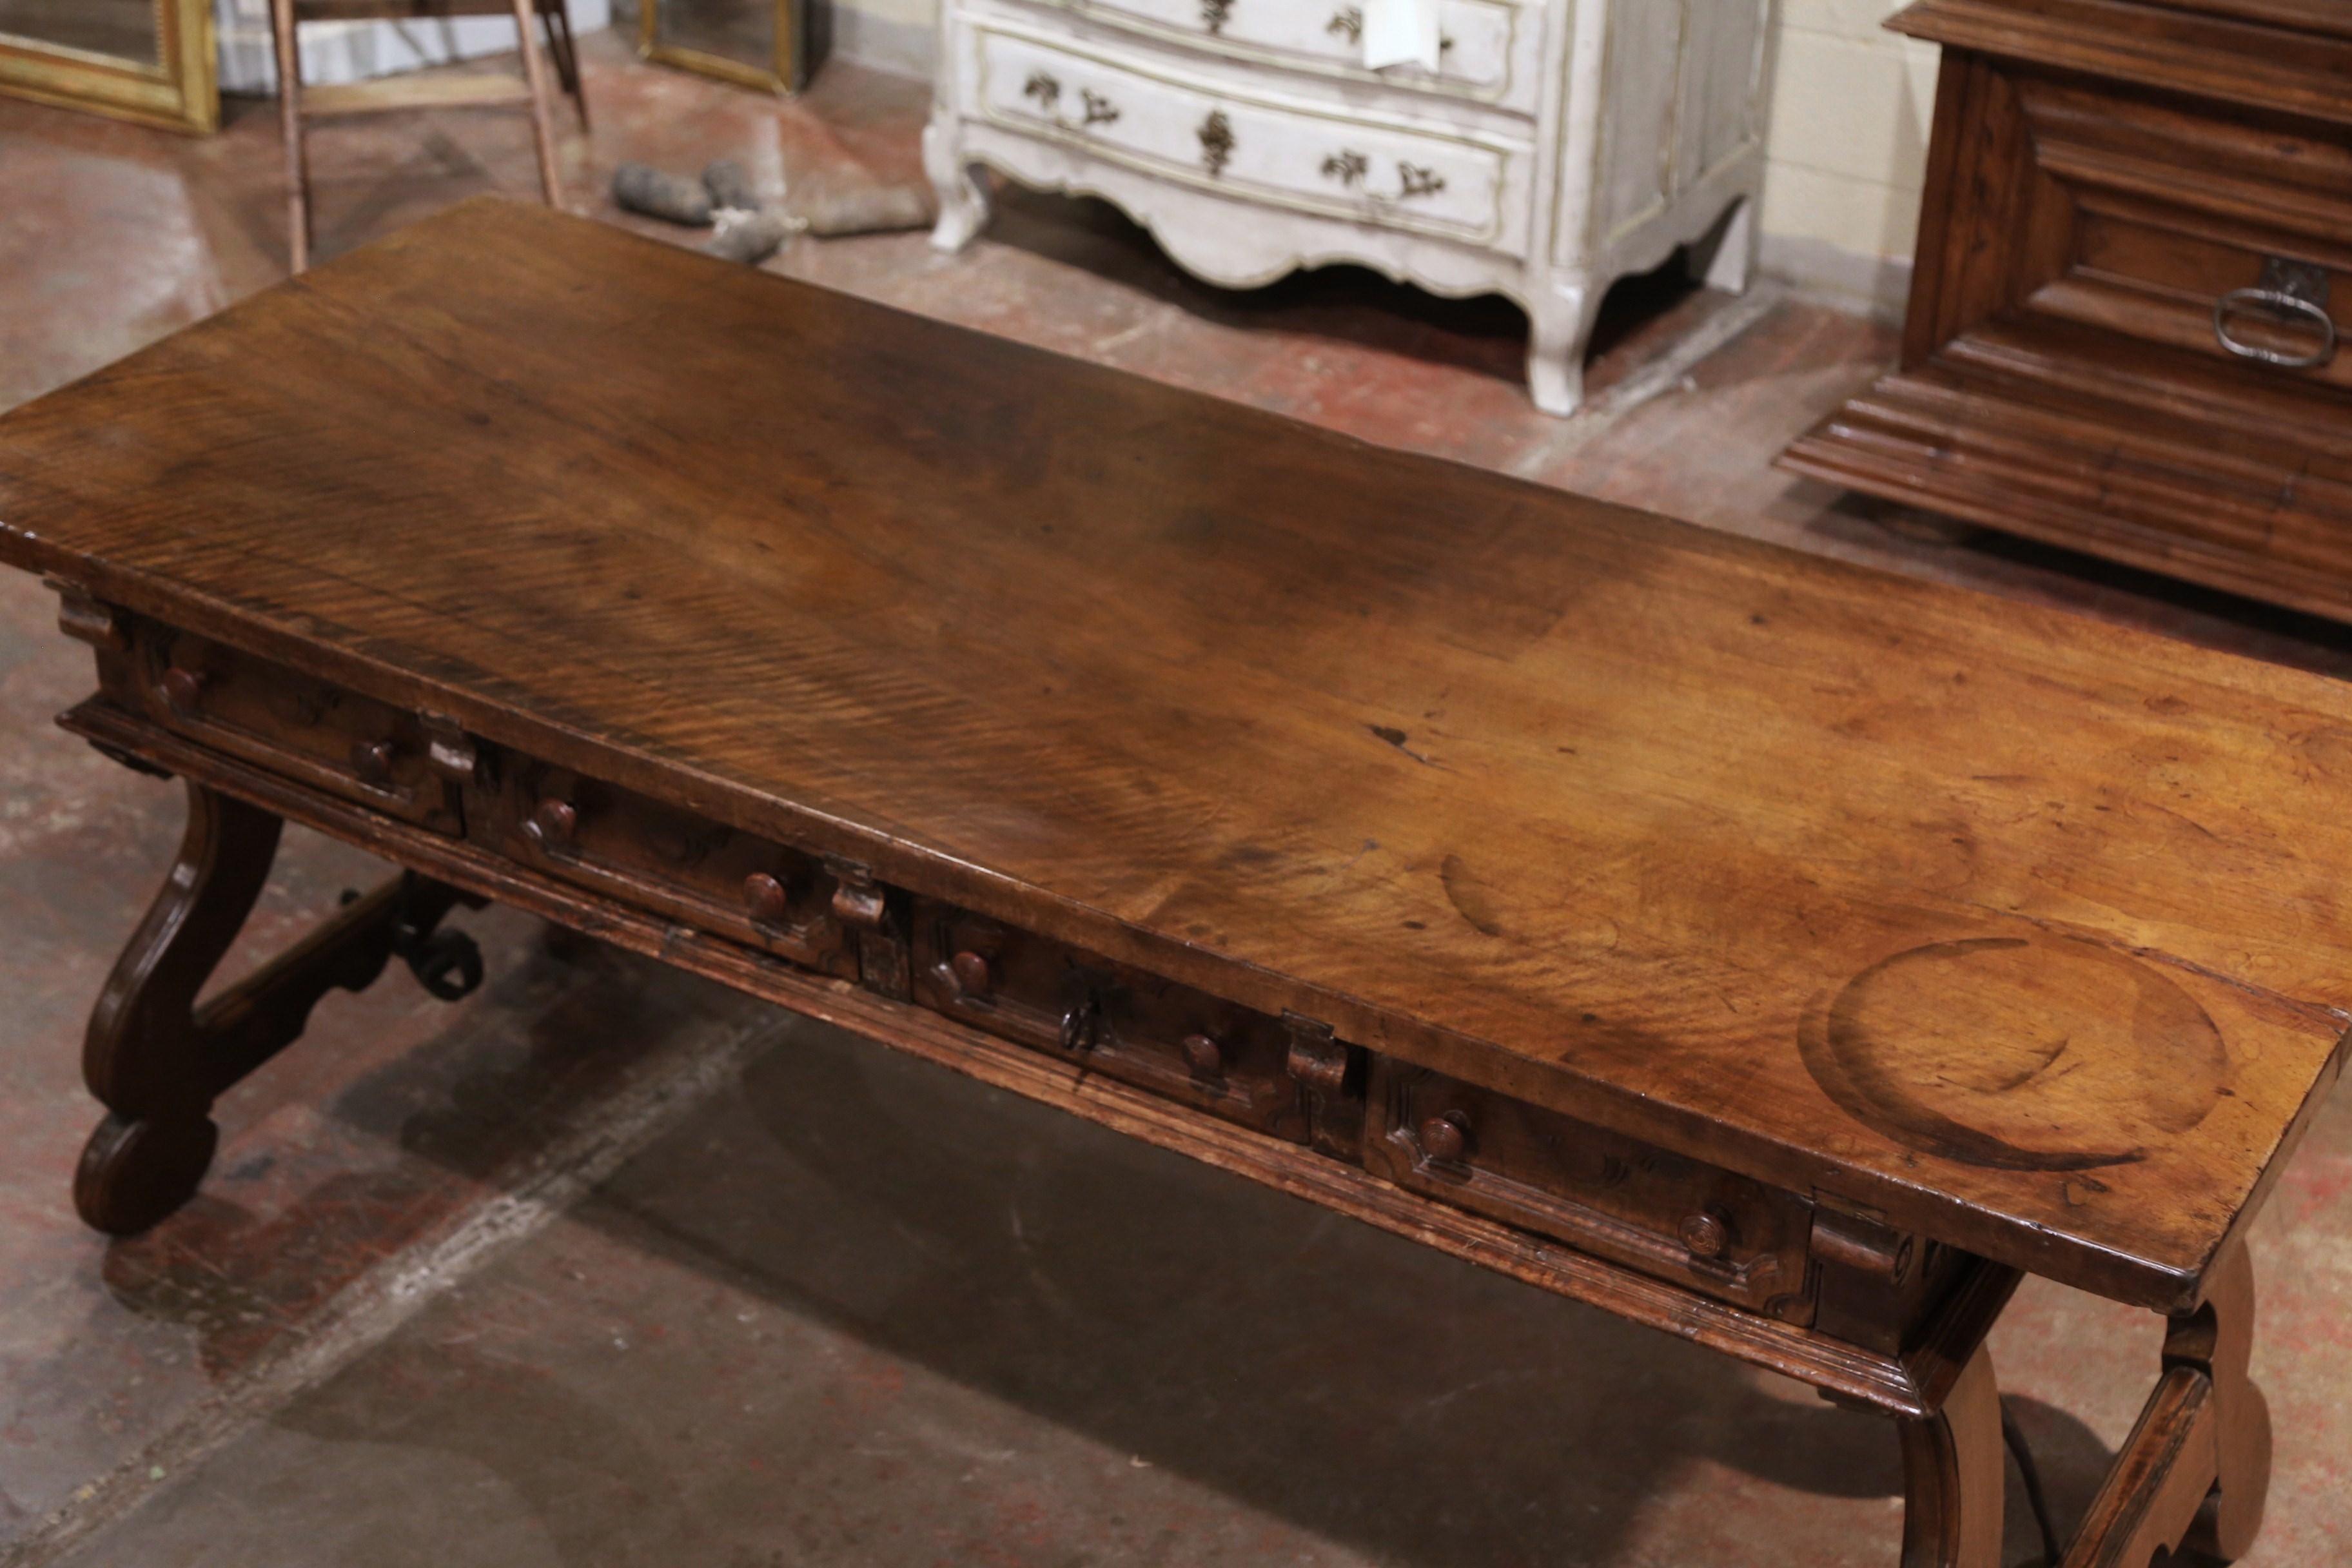 Hand-Carved Mid-18th Century Spanish Carved Walnut and Iron Writing Table Desk with Drawers